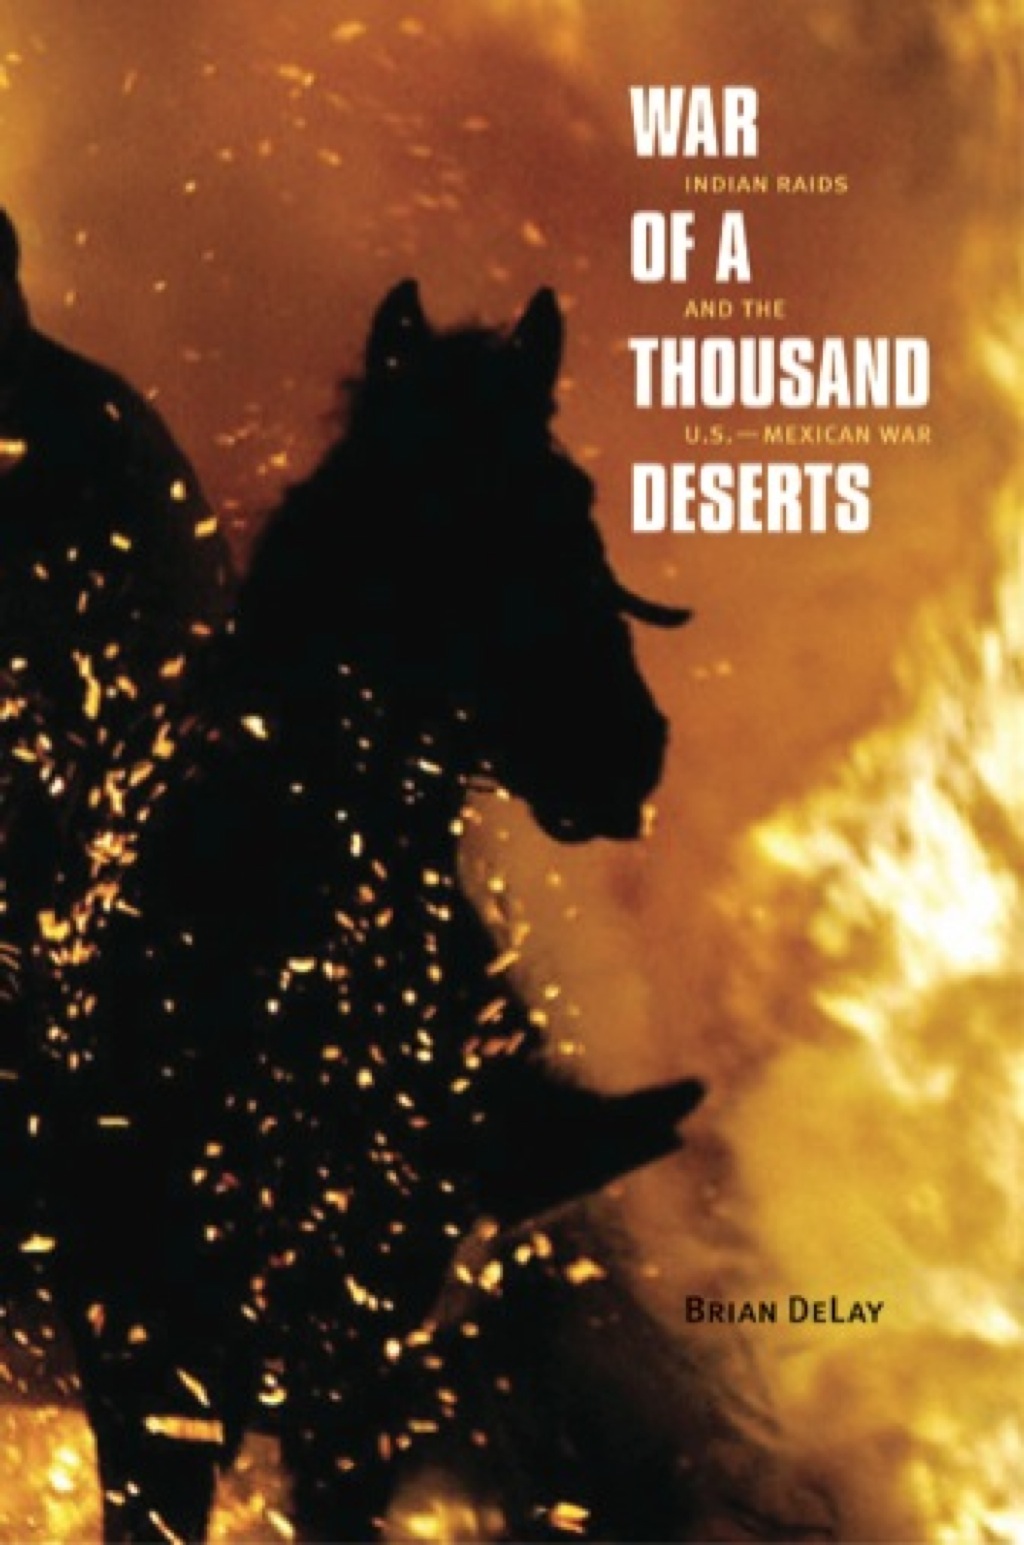 War of a Thousand Deserts: Indian Raids and the U.S.-Mexican War (eBook) - Brian DeLay,